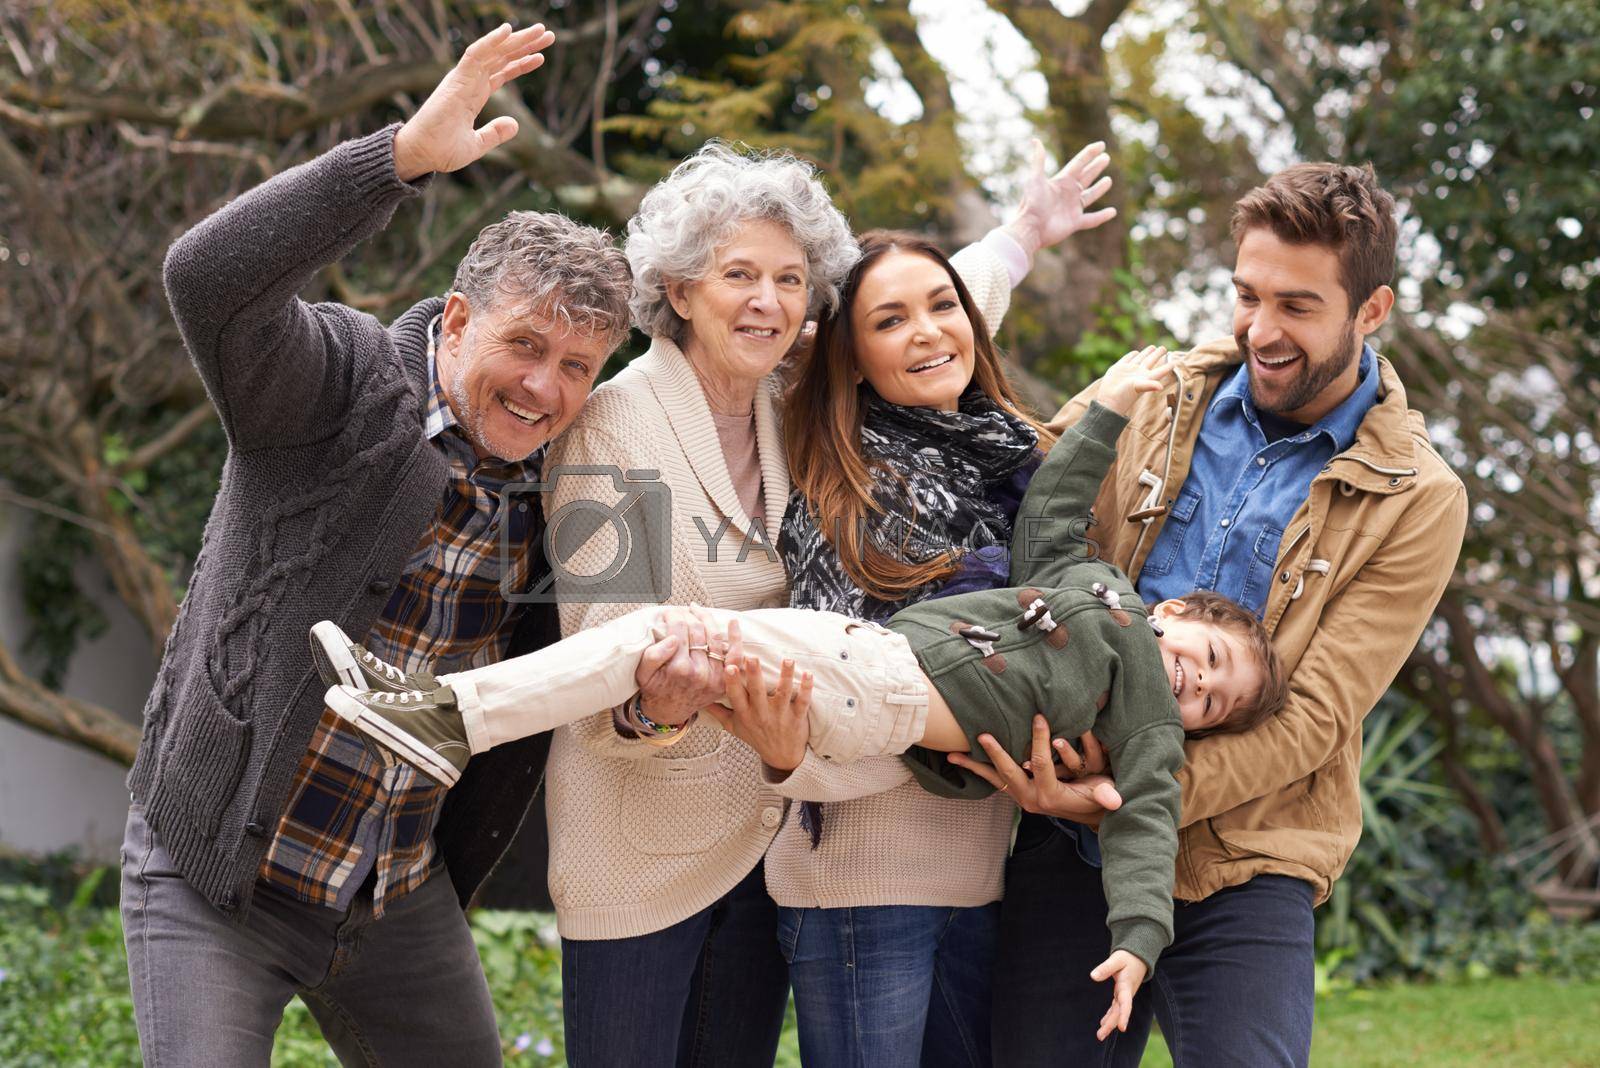 Family over everything. Portrait of a happy multi-generation family having fun outdoors